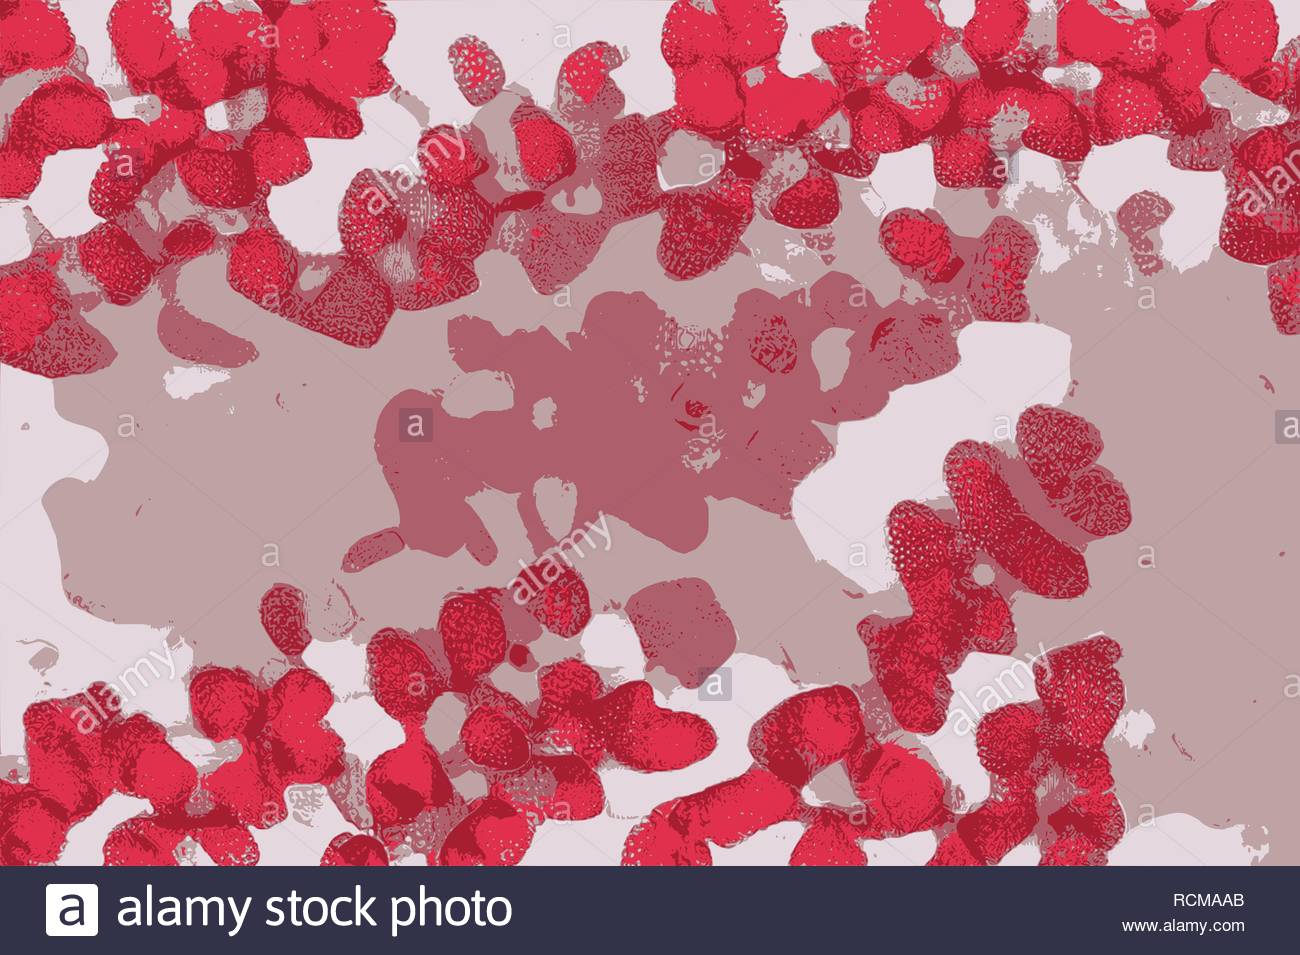 Raspberry Background Textures Of Red Fruits Illustration Stock